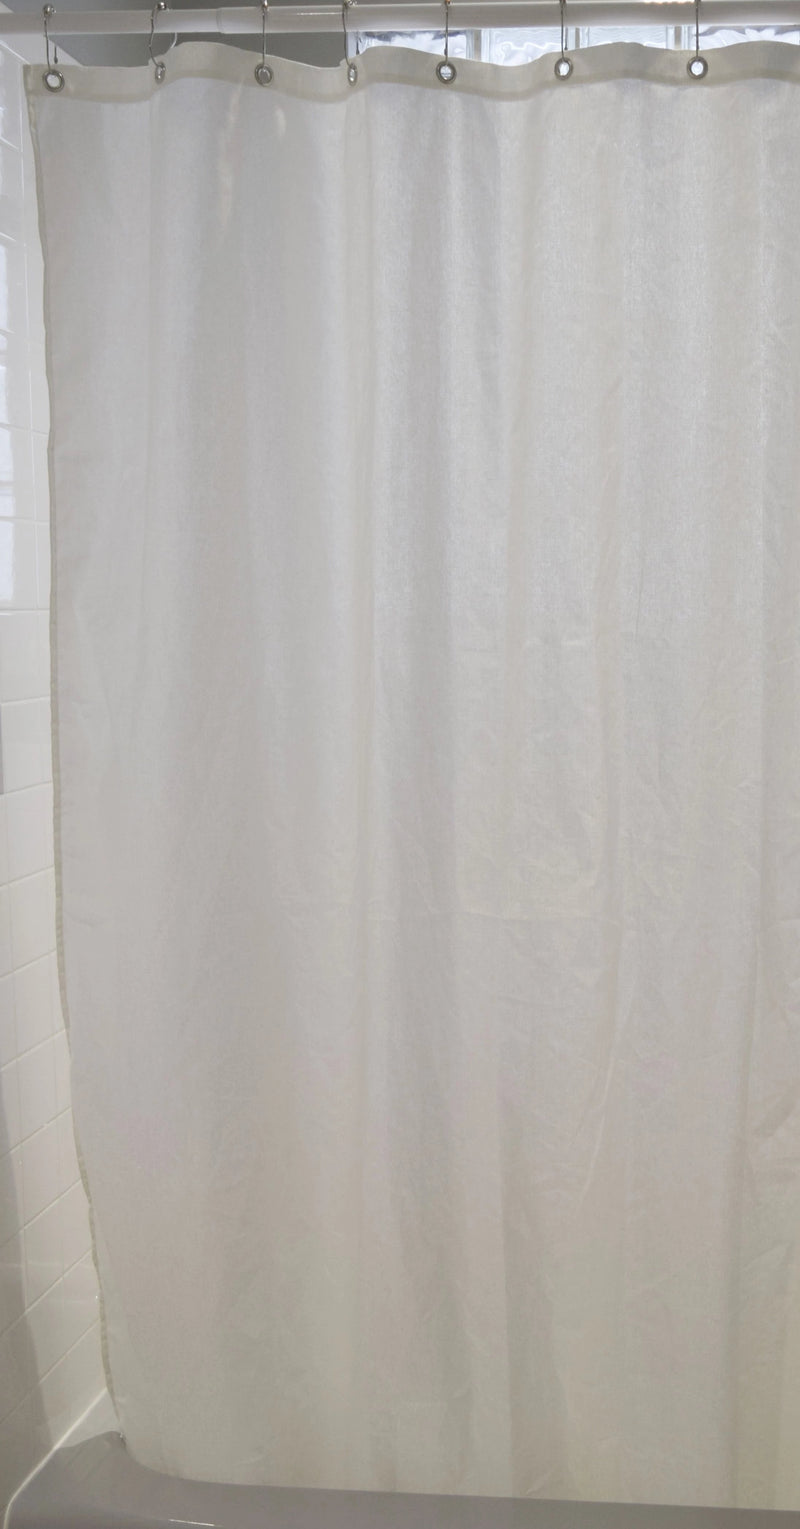 Cotton Shower Curtain – White or Natural, Bath, Tub + Stall Sizes – Made in USA